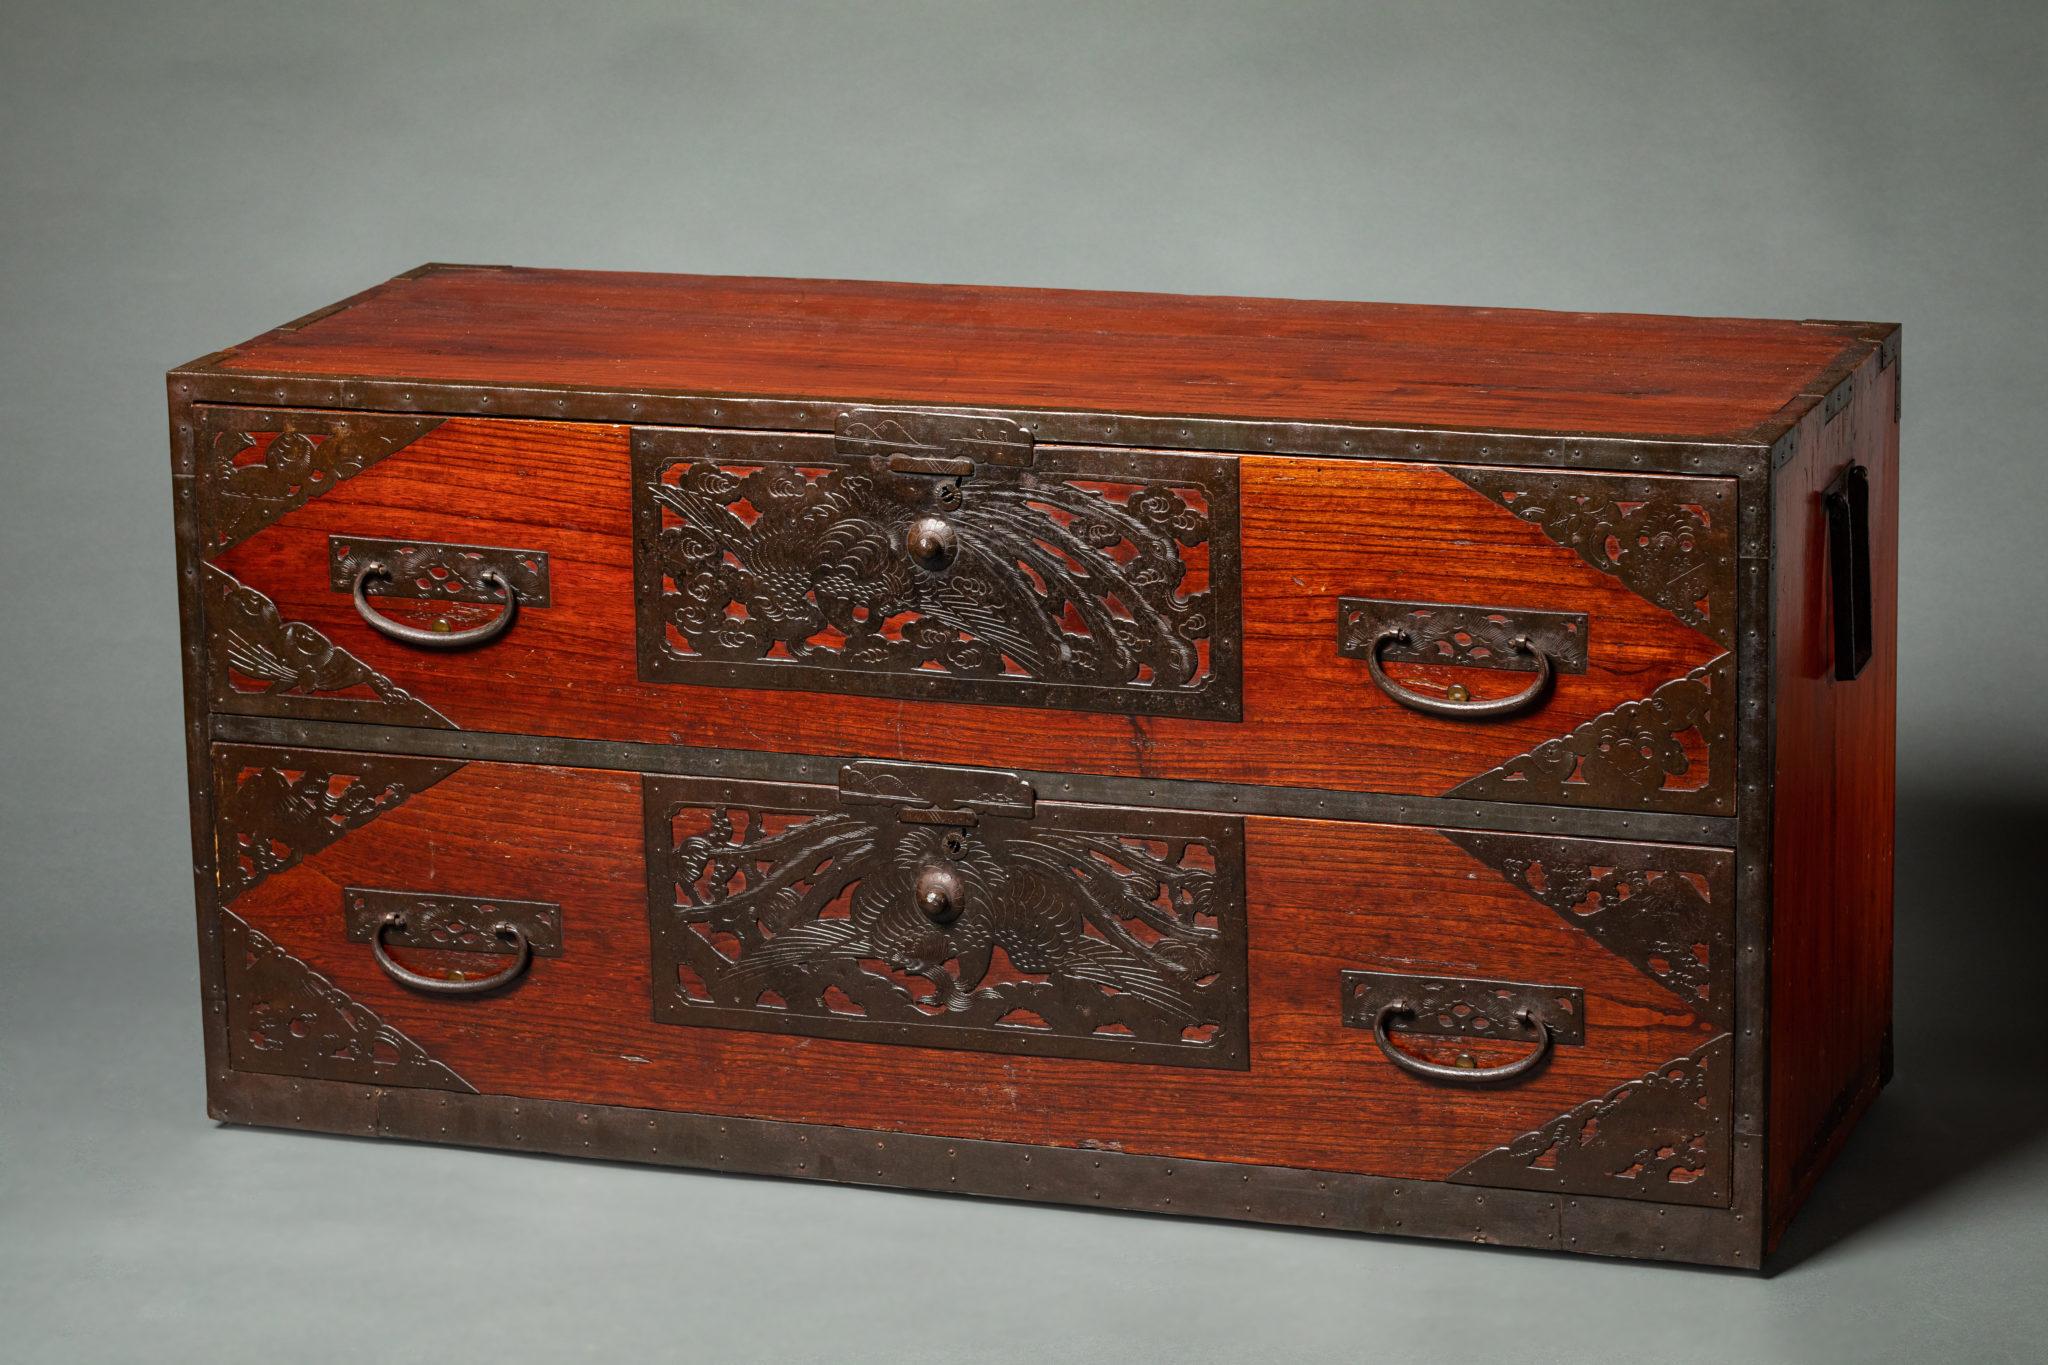 With two drawers. Top section of a two section chest. Elaborate hardware with cranes and clouds design. Hardware on all corners.